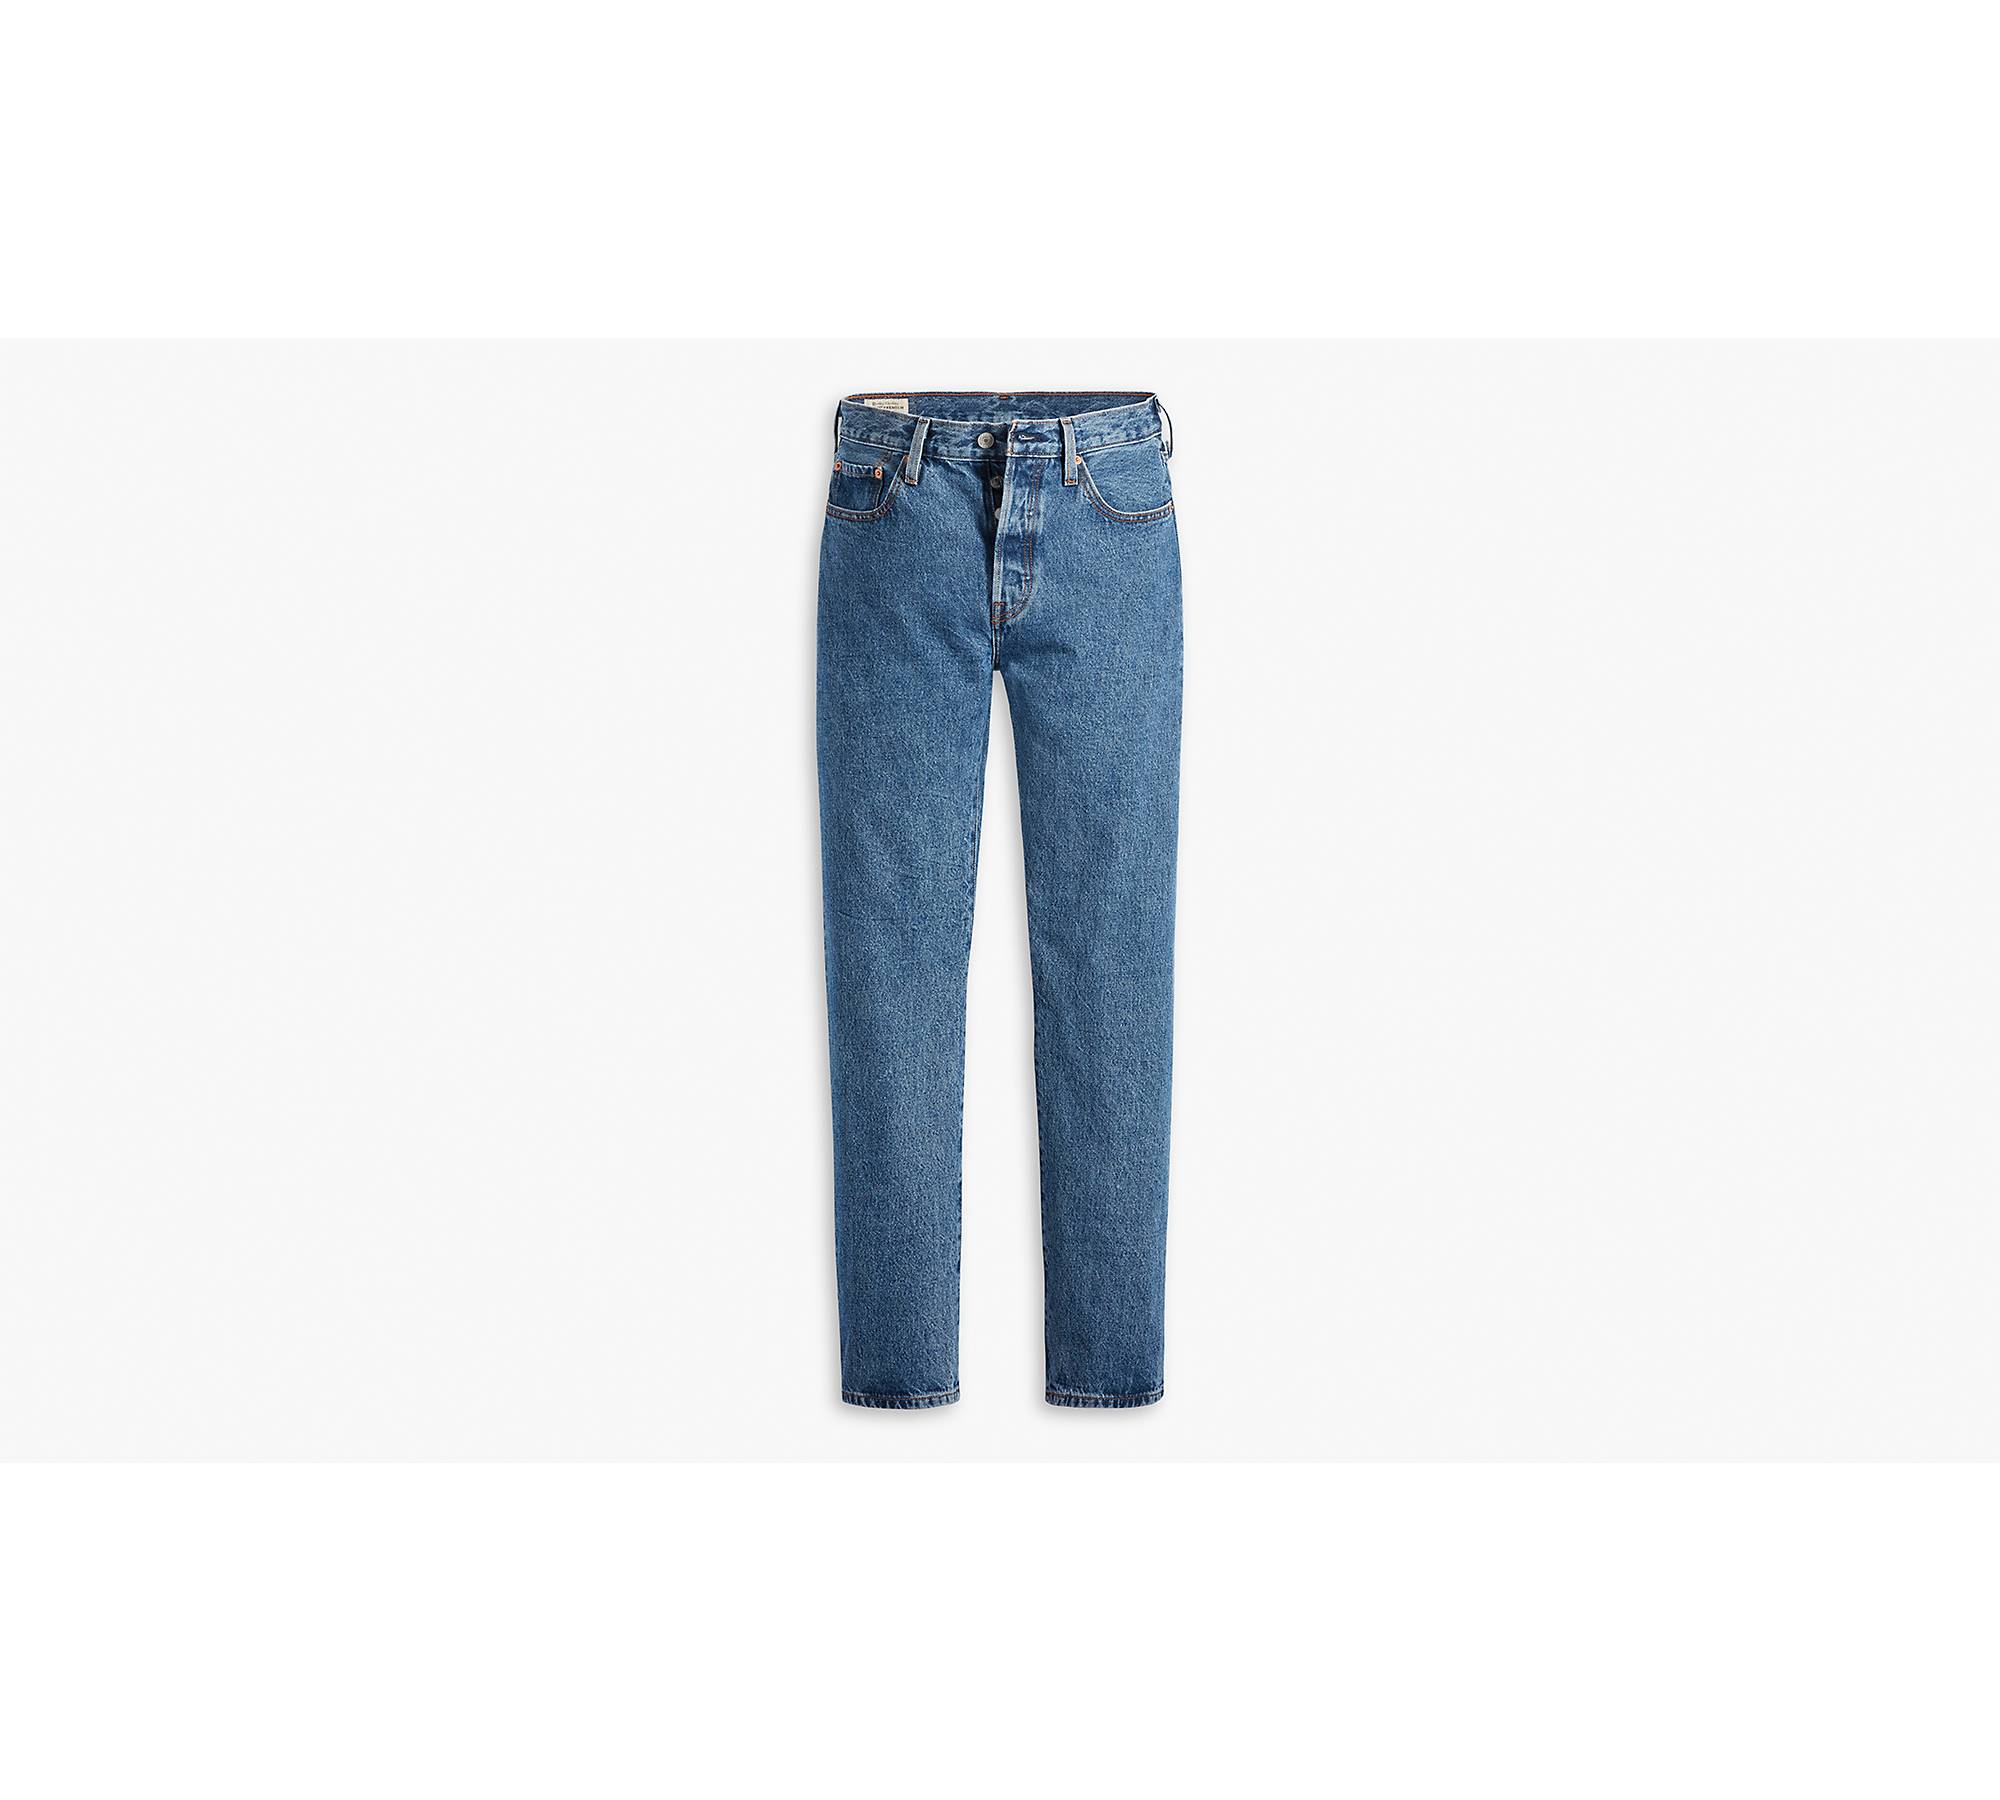 Levi's 501® Jeans For Women - Shout Out Stone